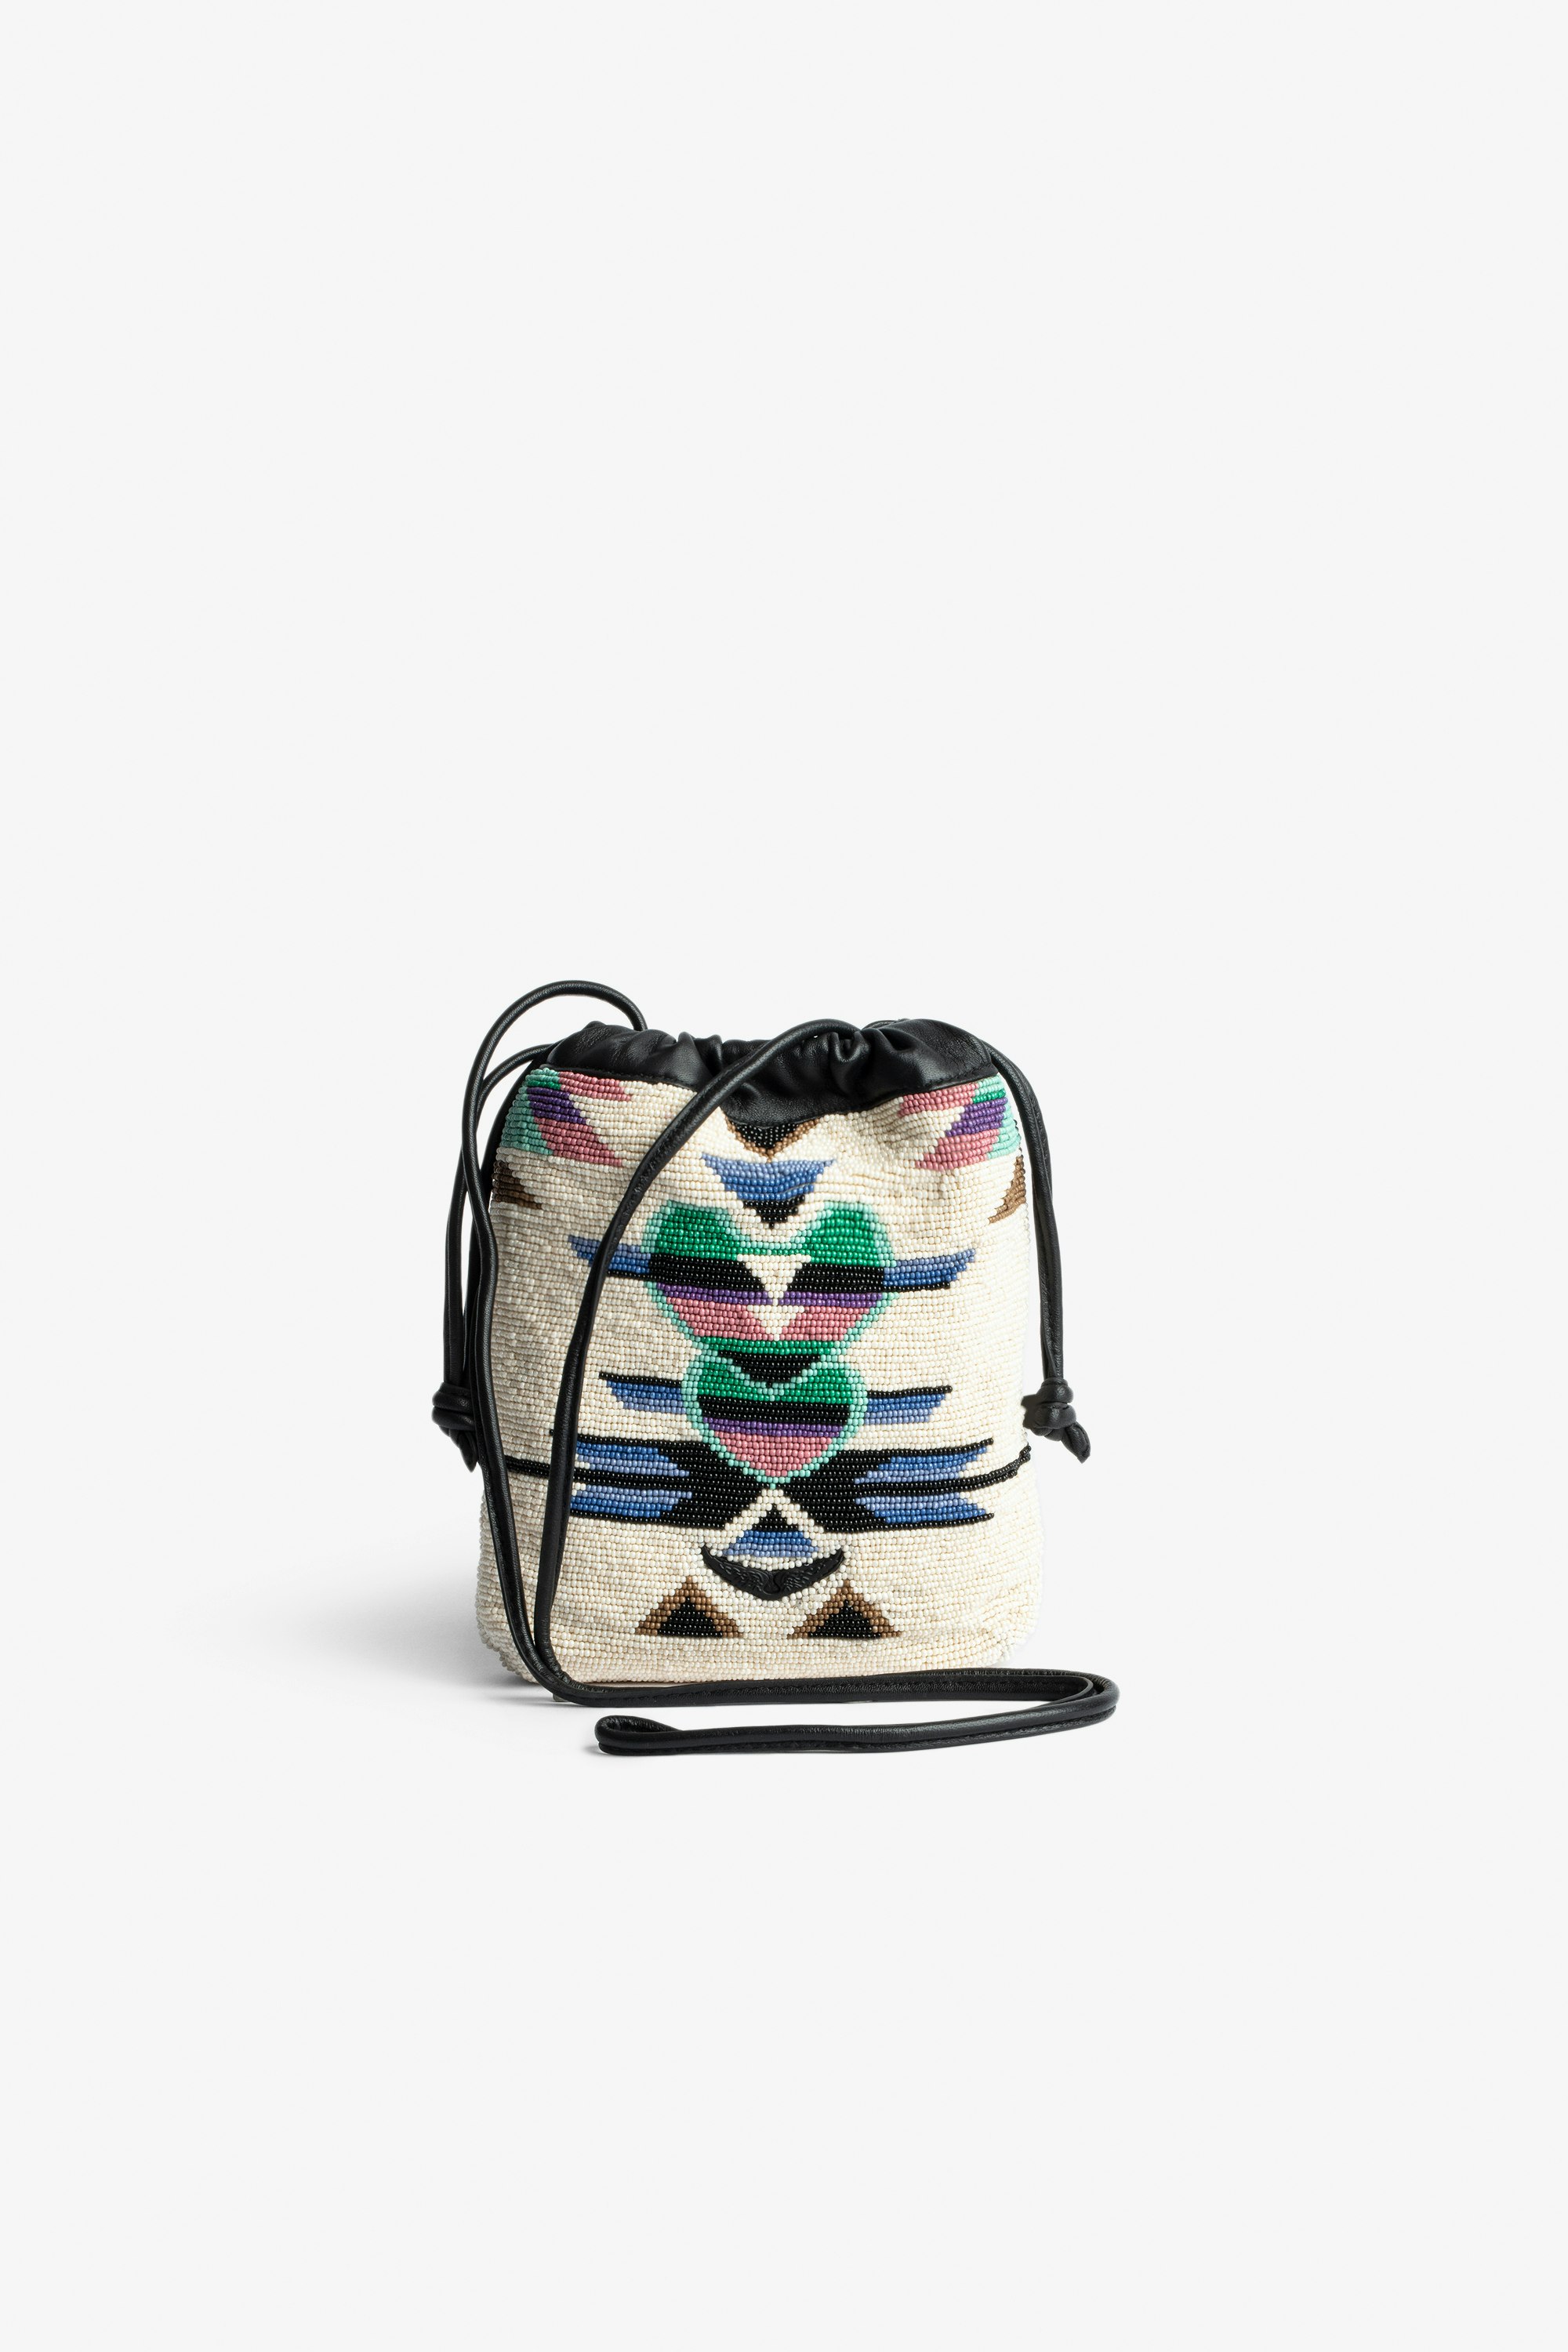 Rock To Go Bag Women's small bucket bag in black leather with multicolour beads and arrows and hearts motifs